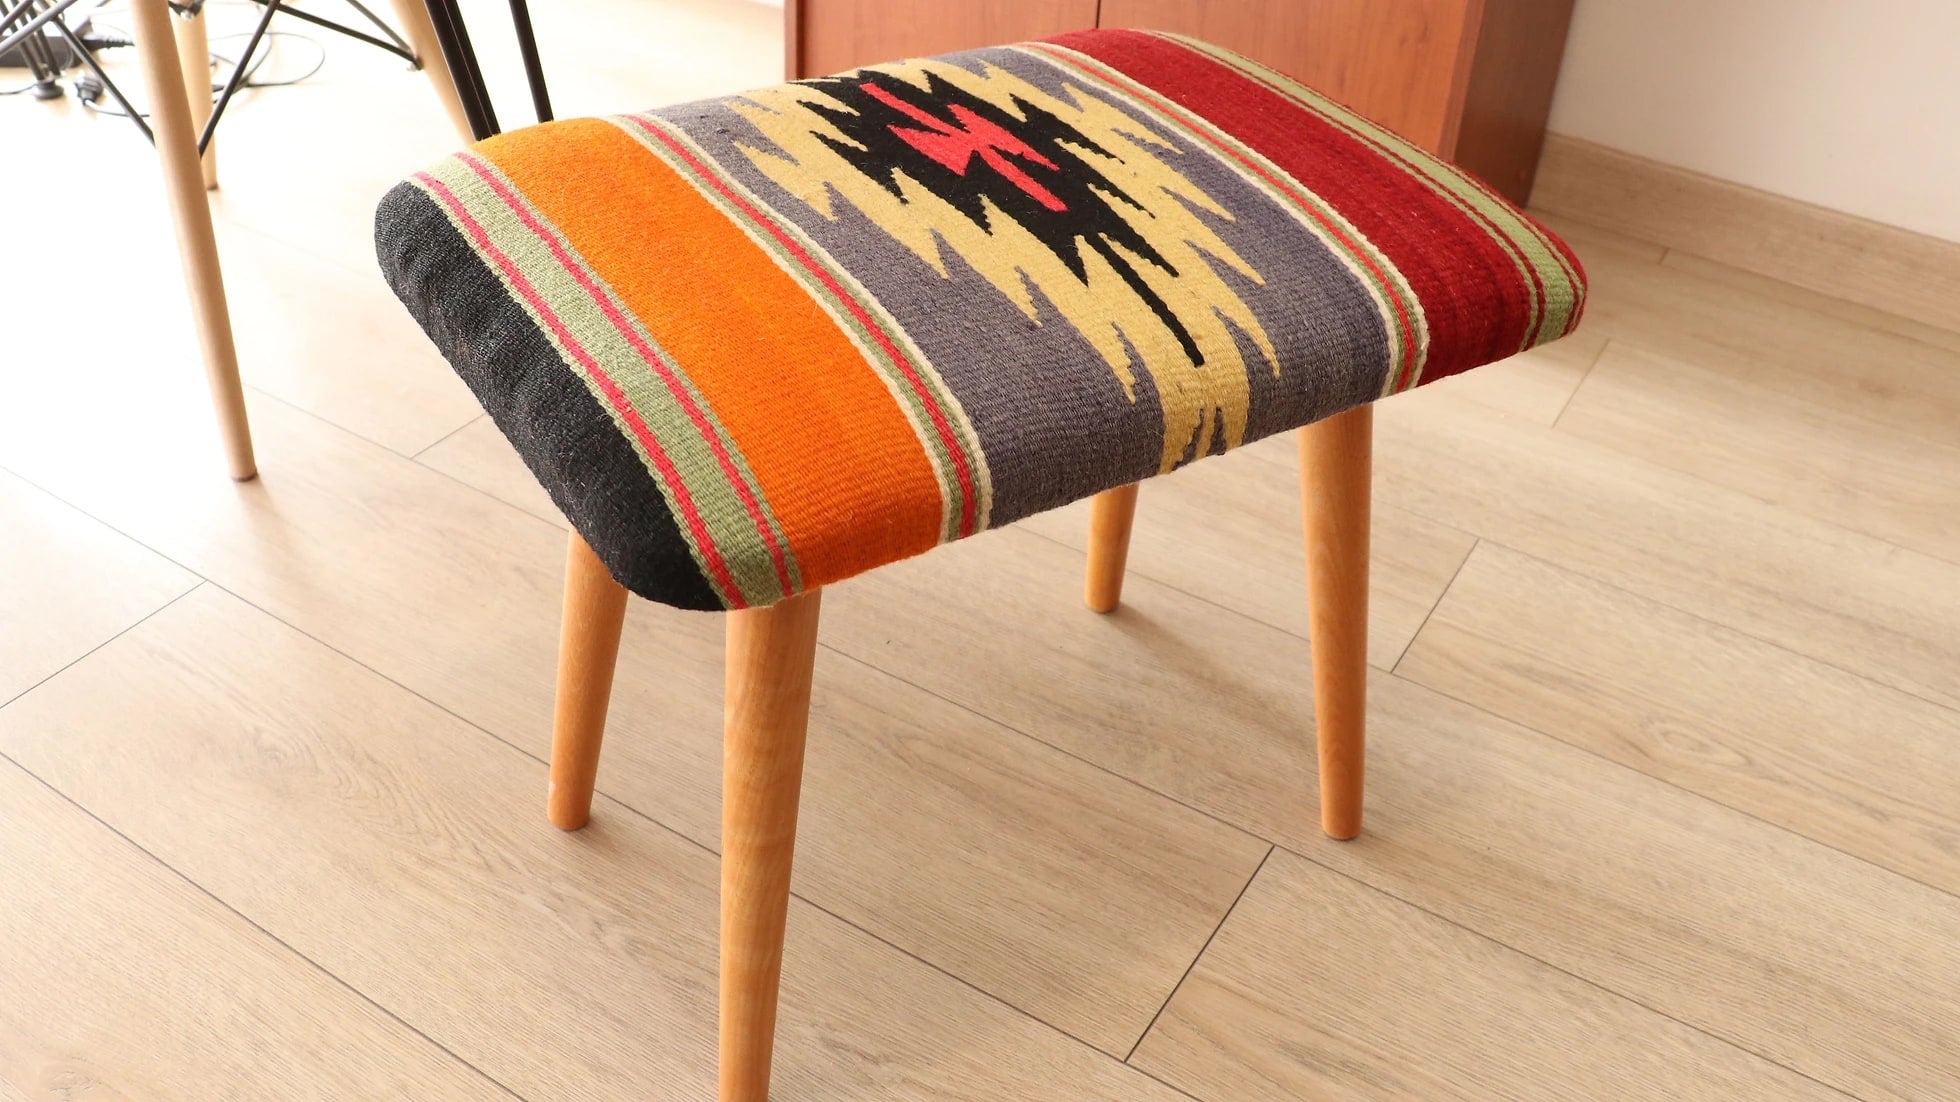 upholstered bench made of handwoven wool flat-weave Turkish rug